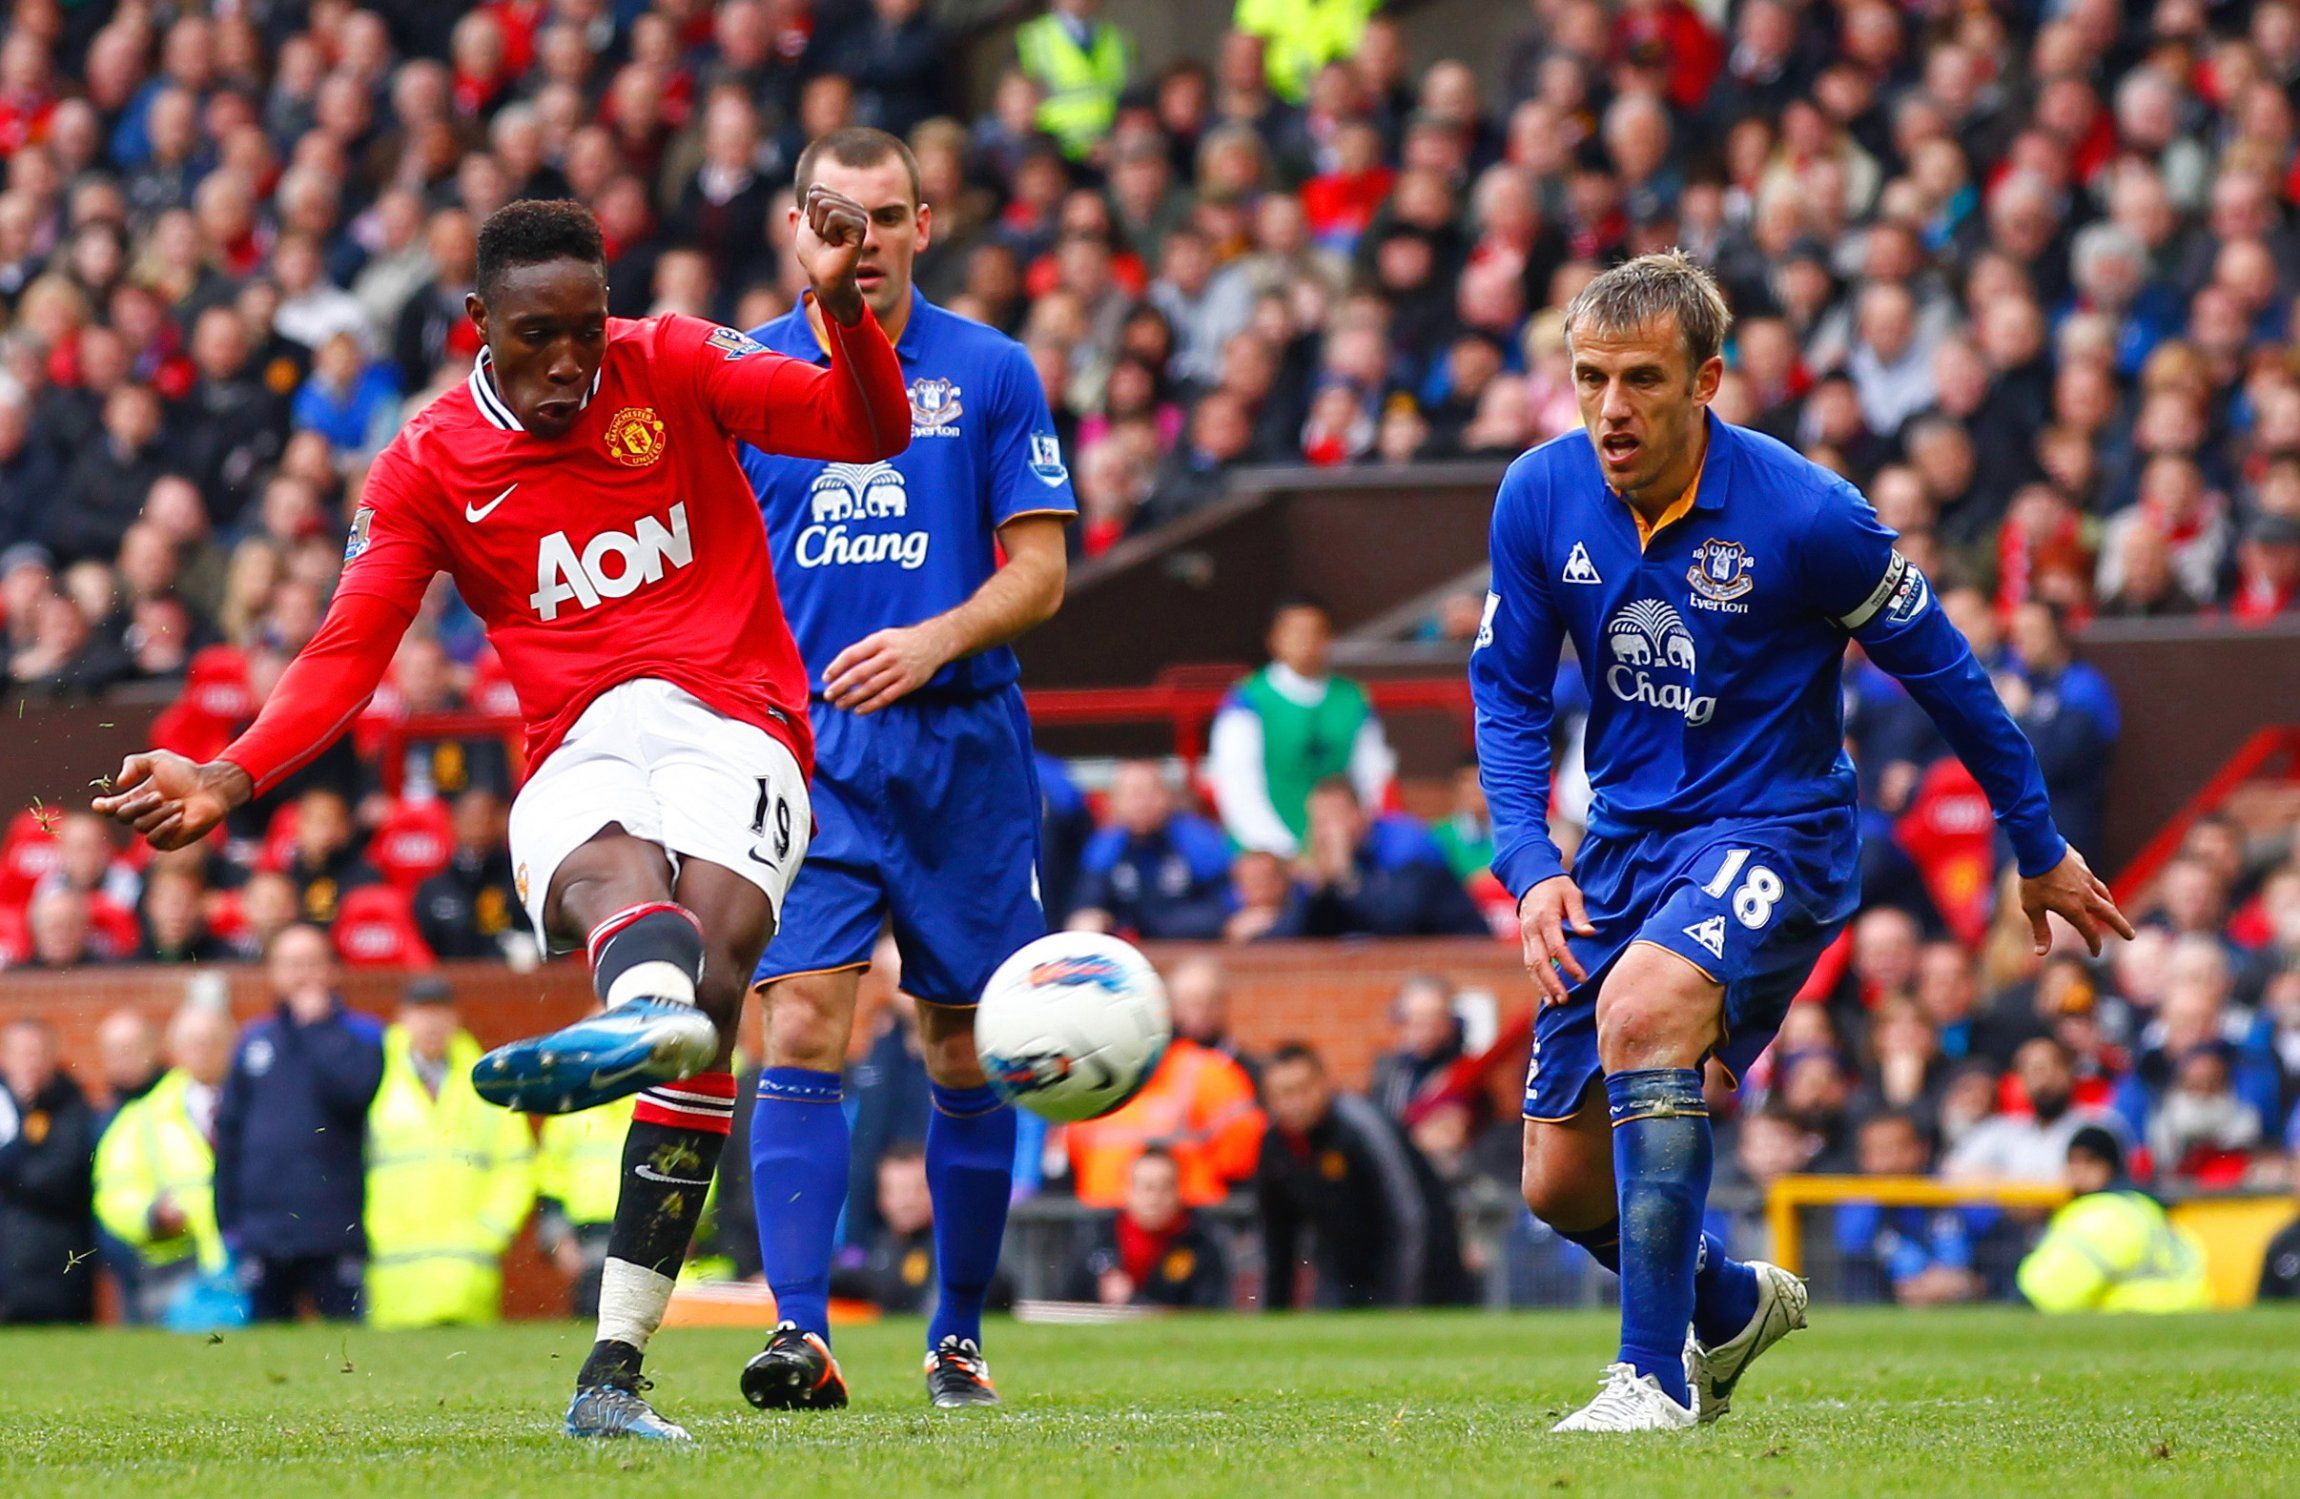 Danny Welbeck scored for Man United against Everton at Old trafford